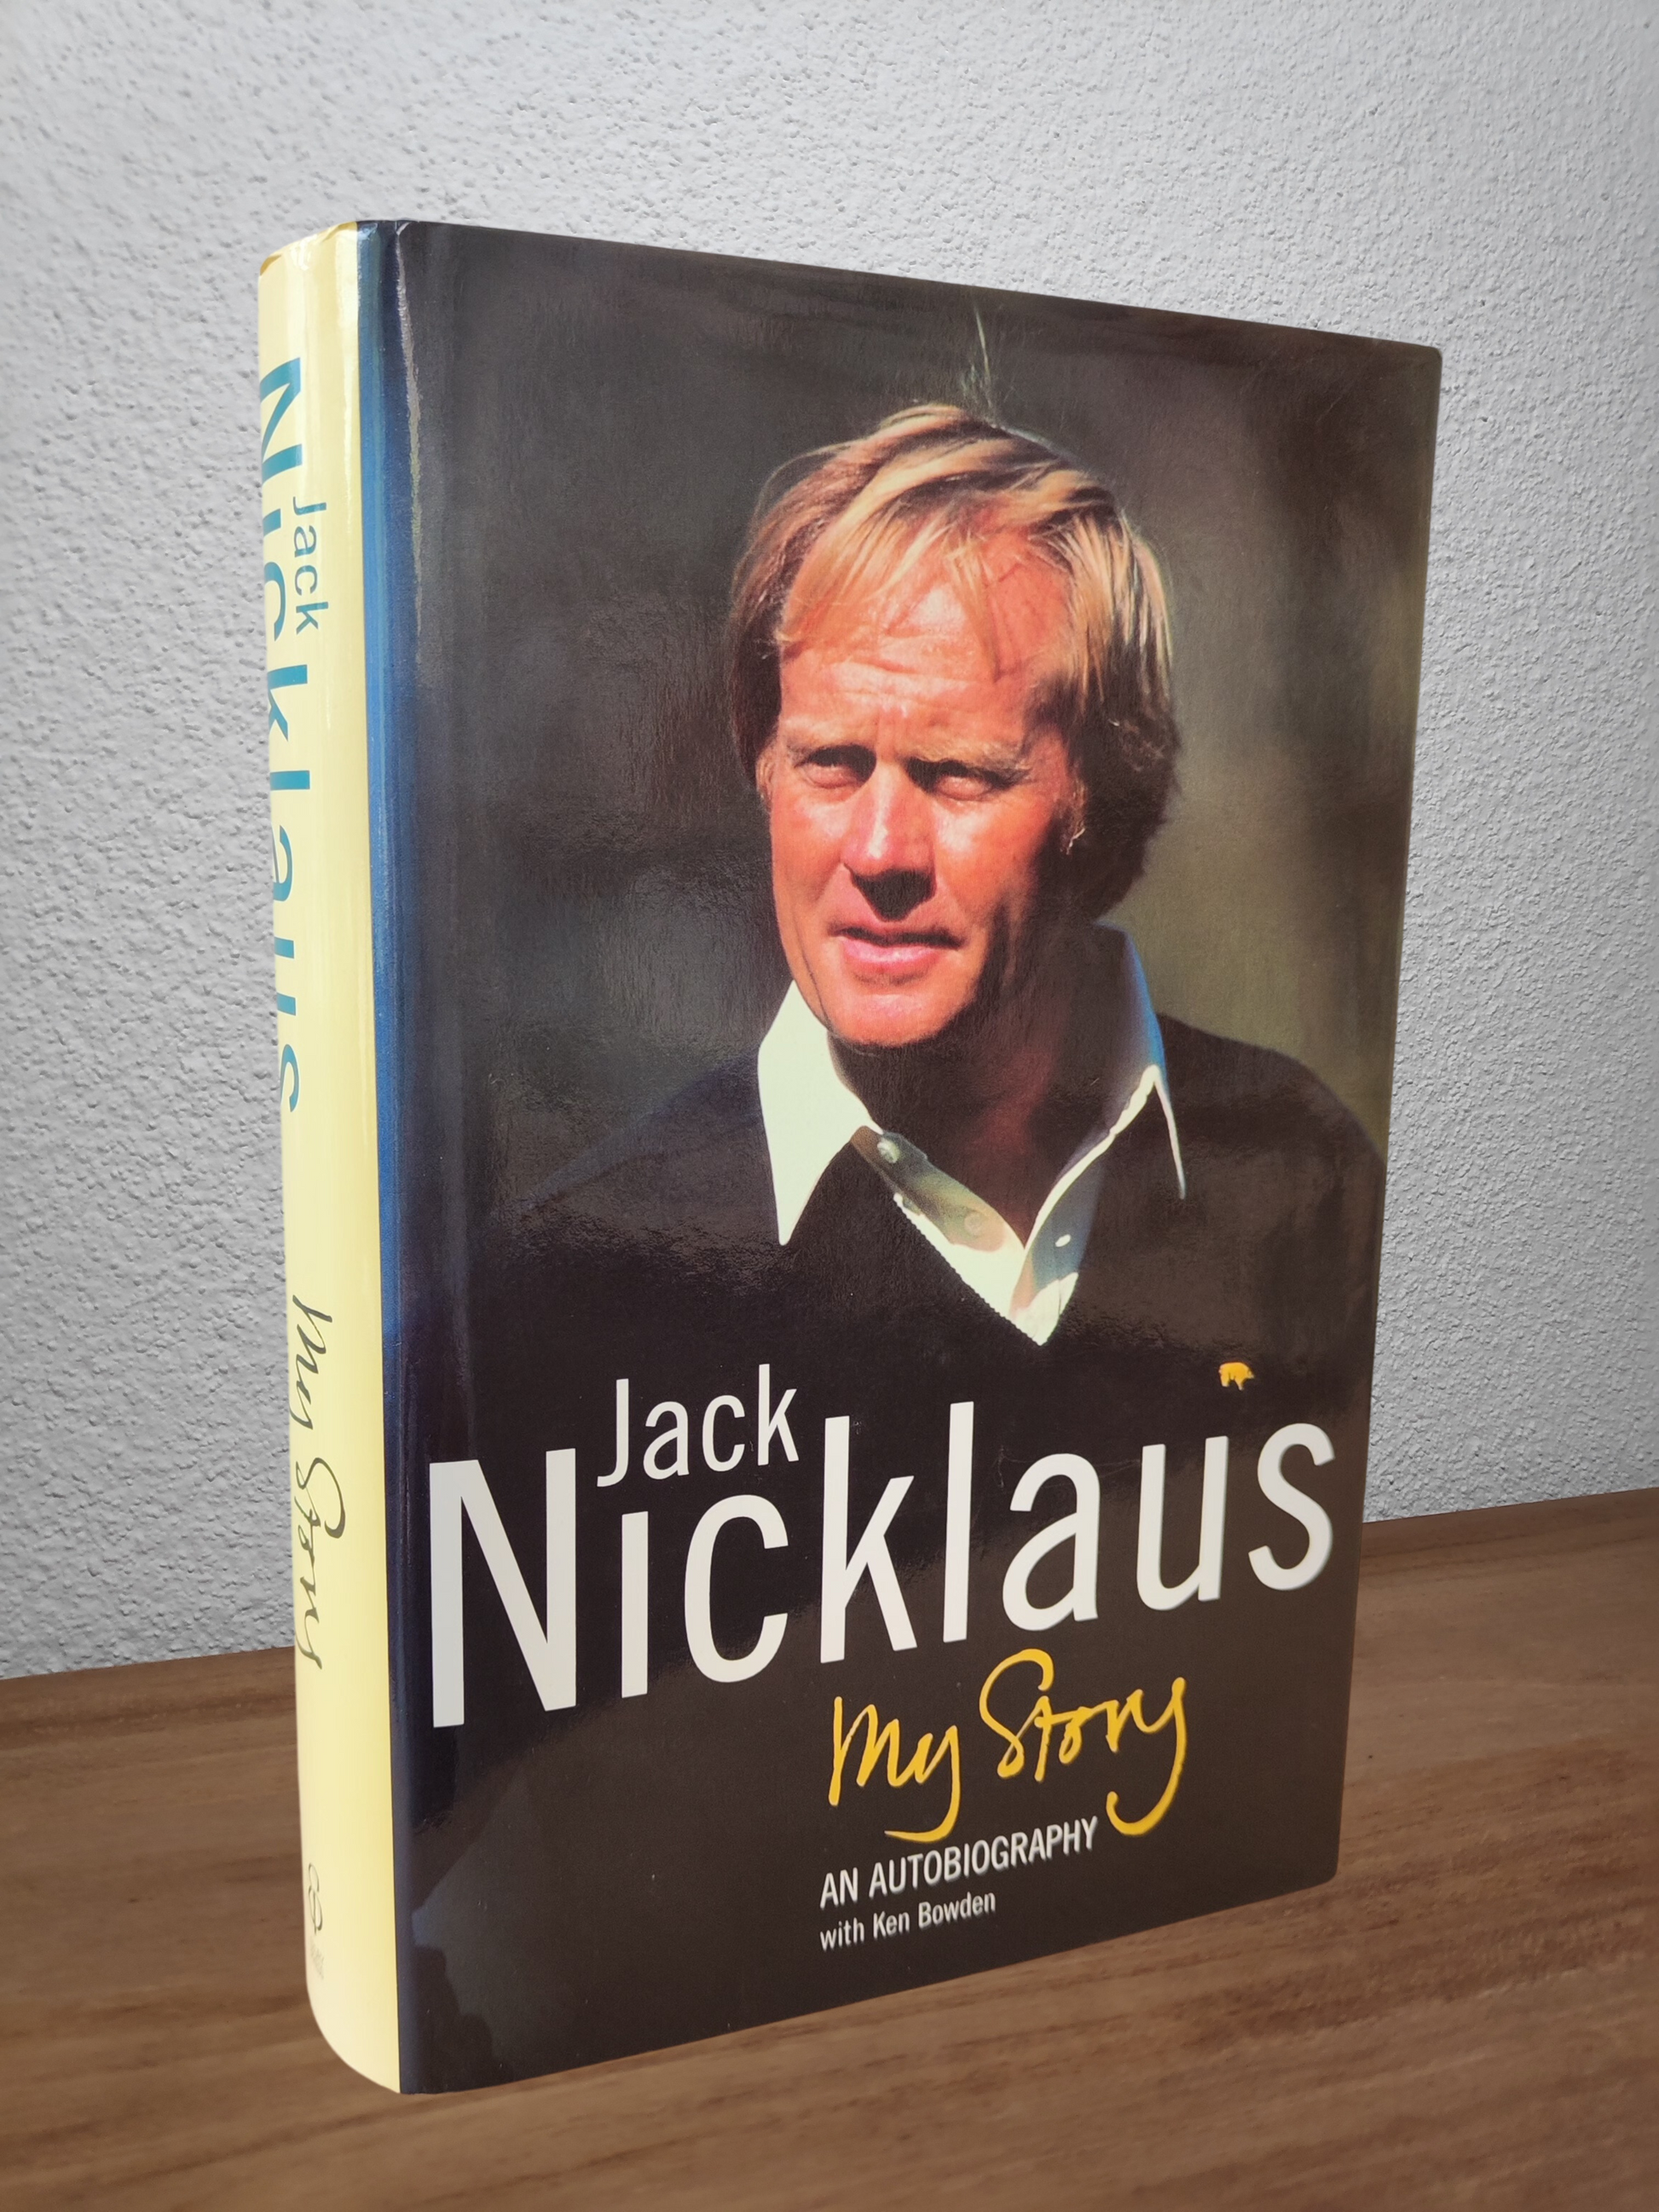 Jack Nicklaus with Ken Bowden - My Story - Second-hand english book to deliver in Zurich & Switzerland